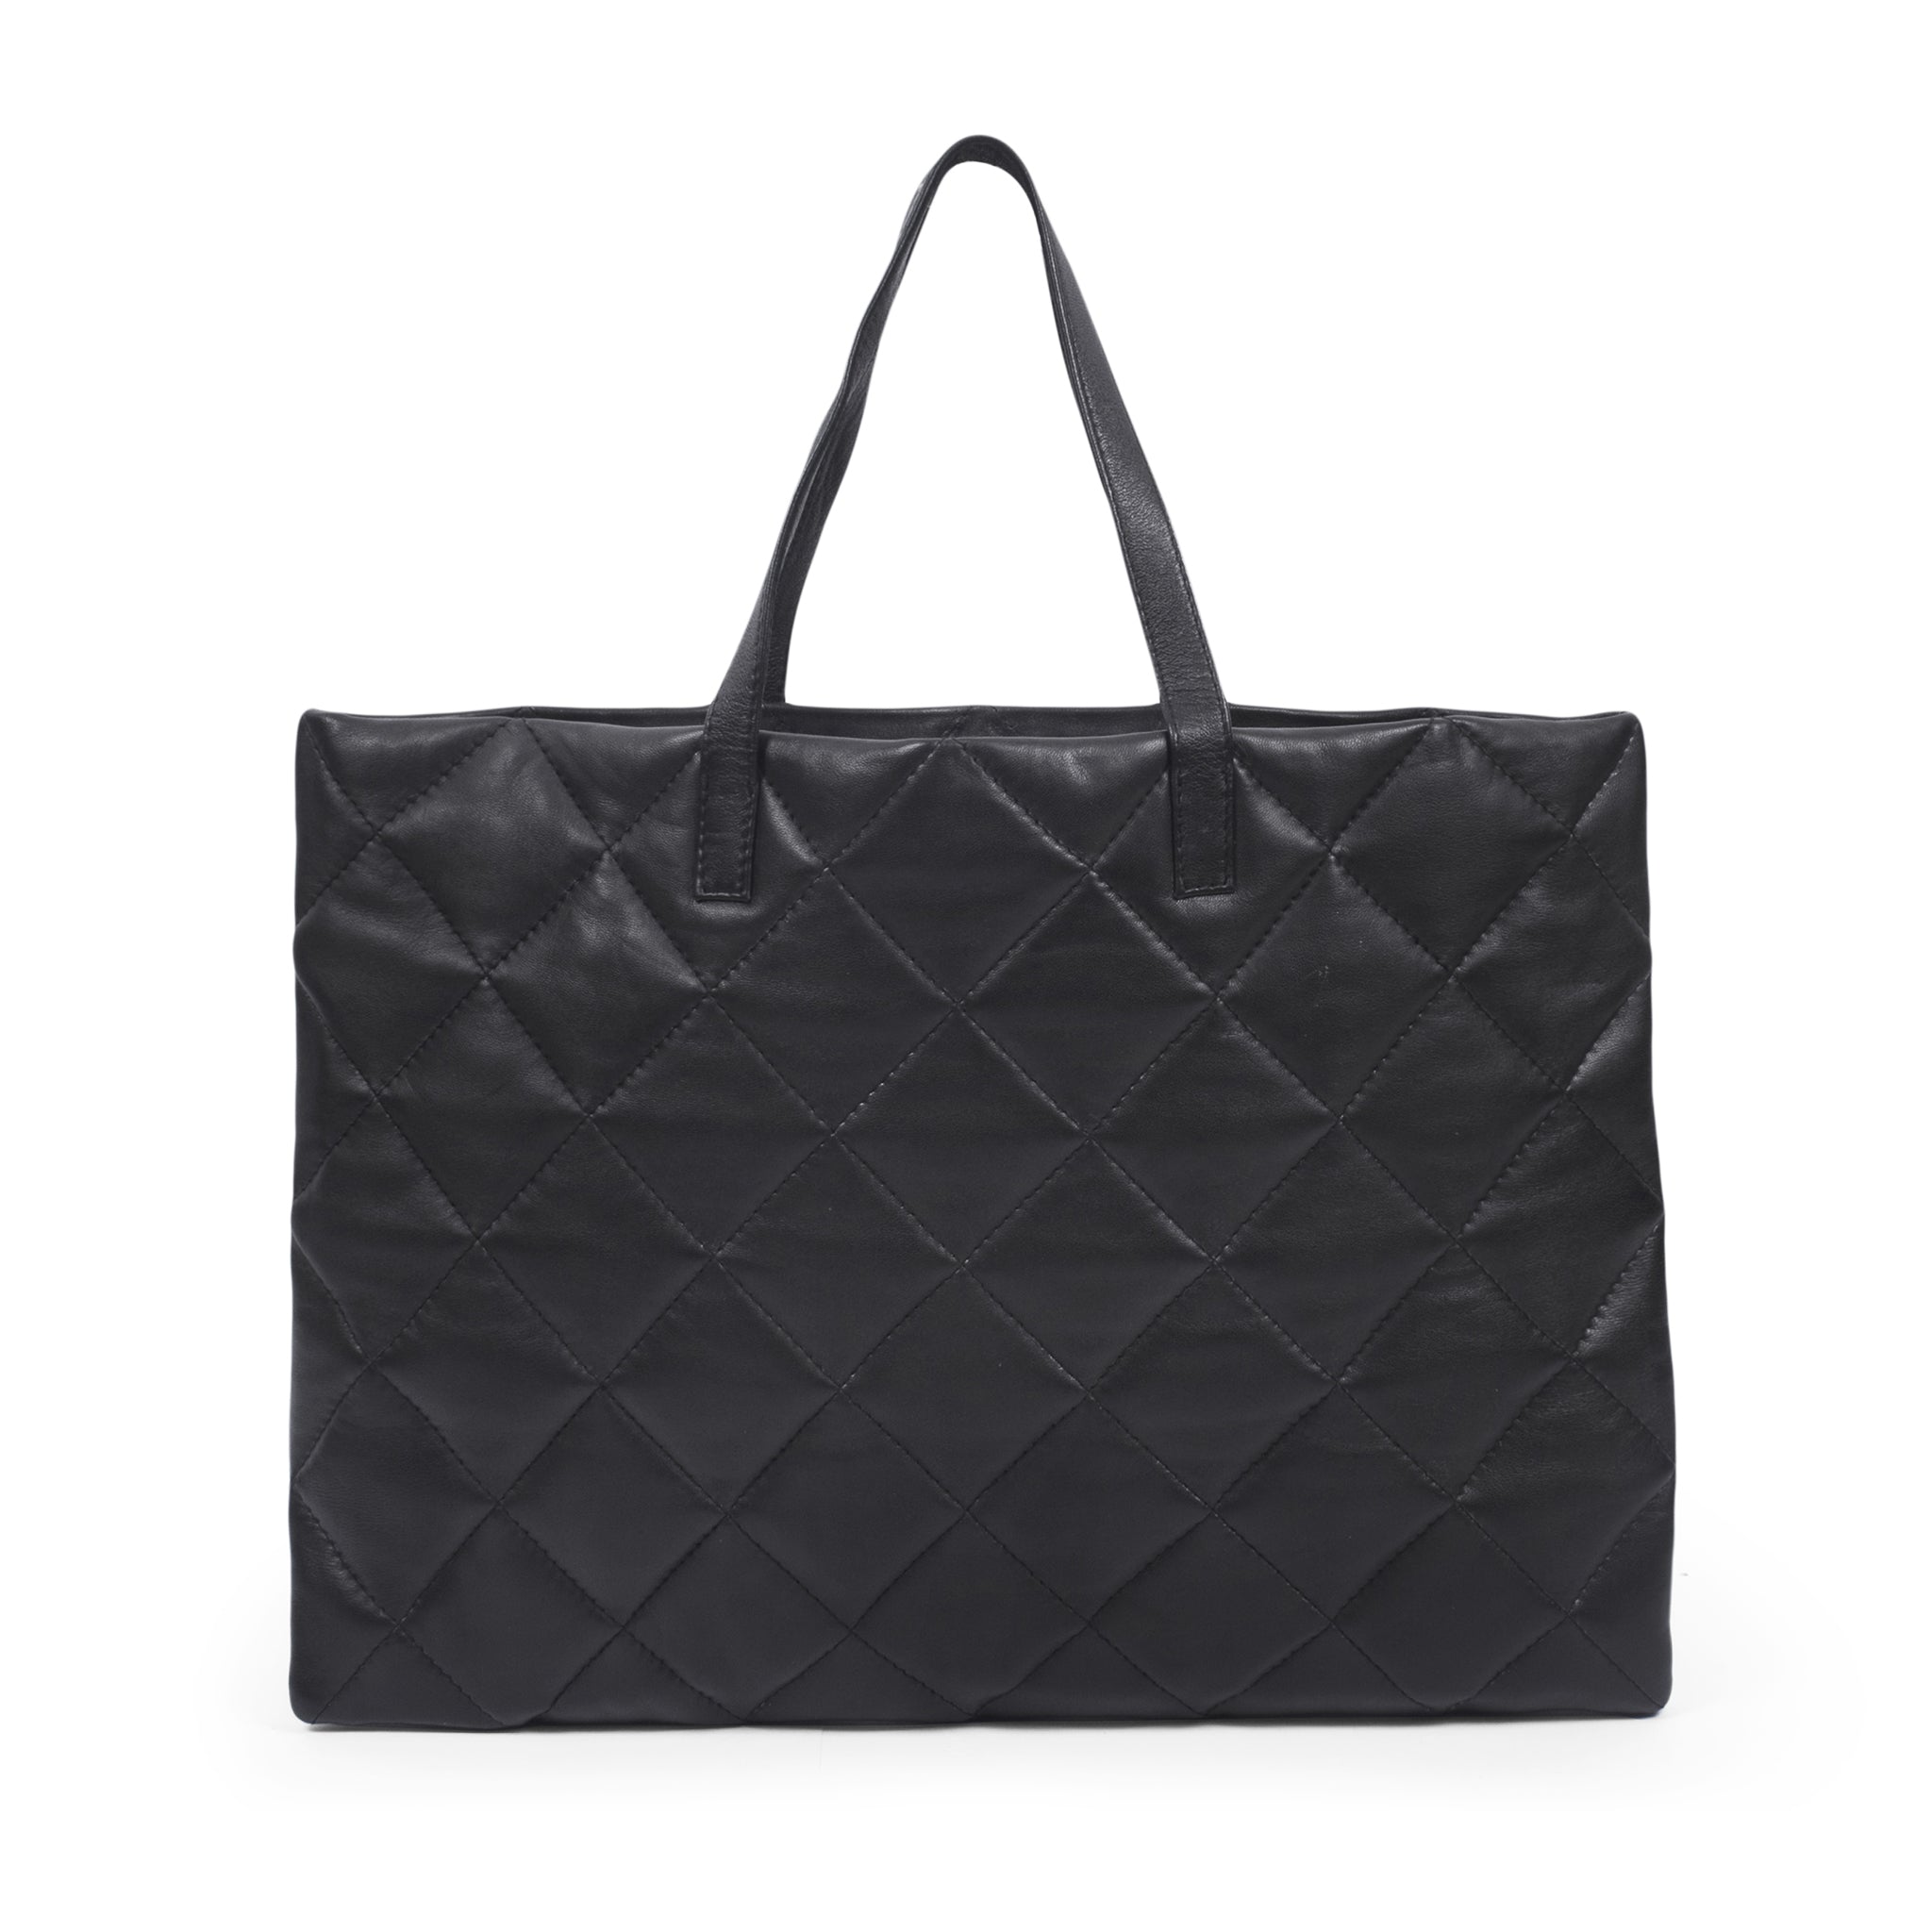 Black leather quilted laptop tote bag